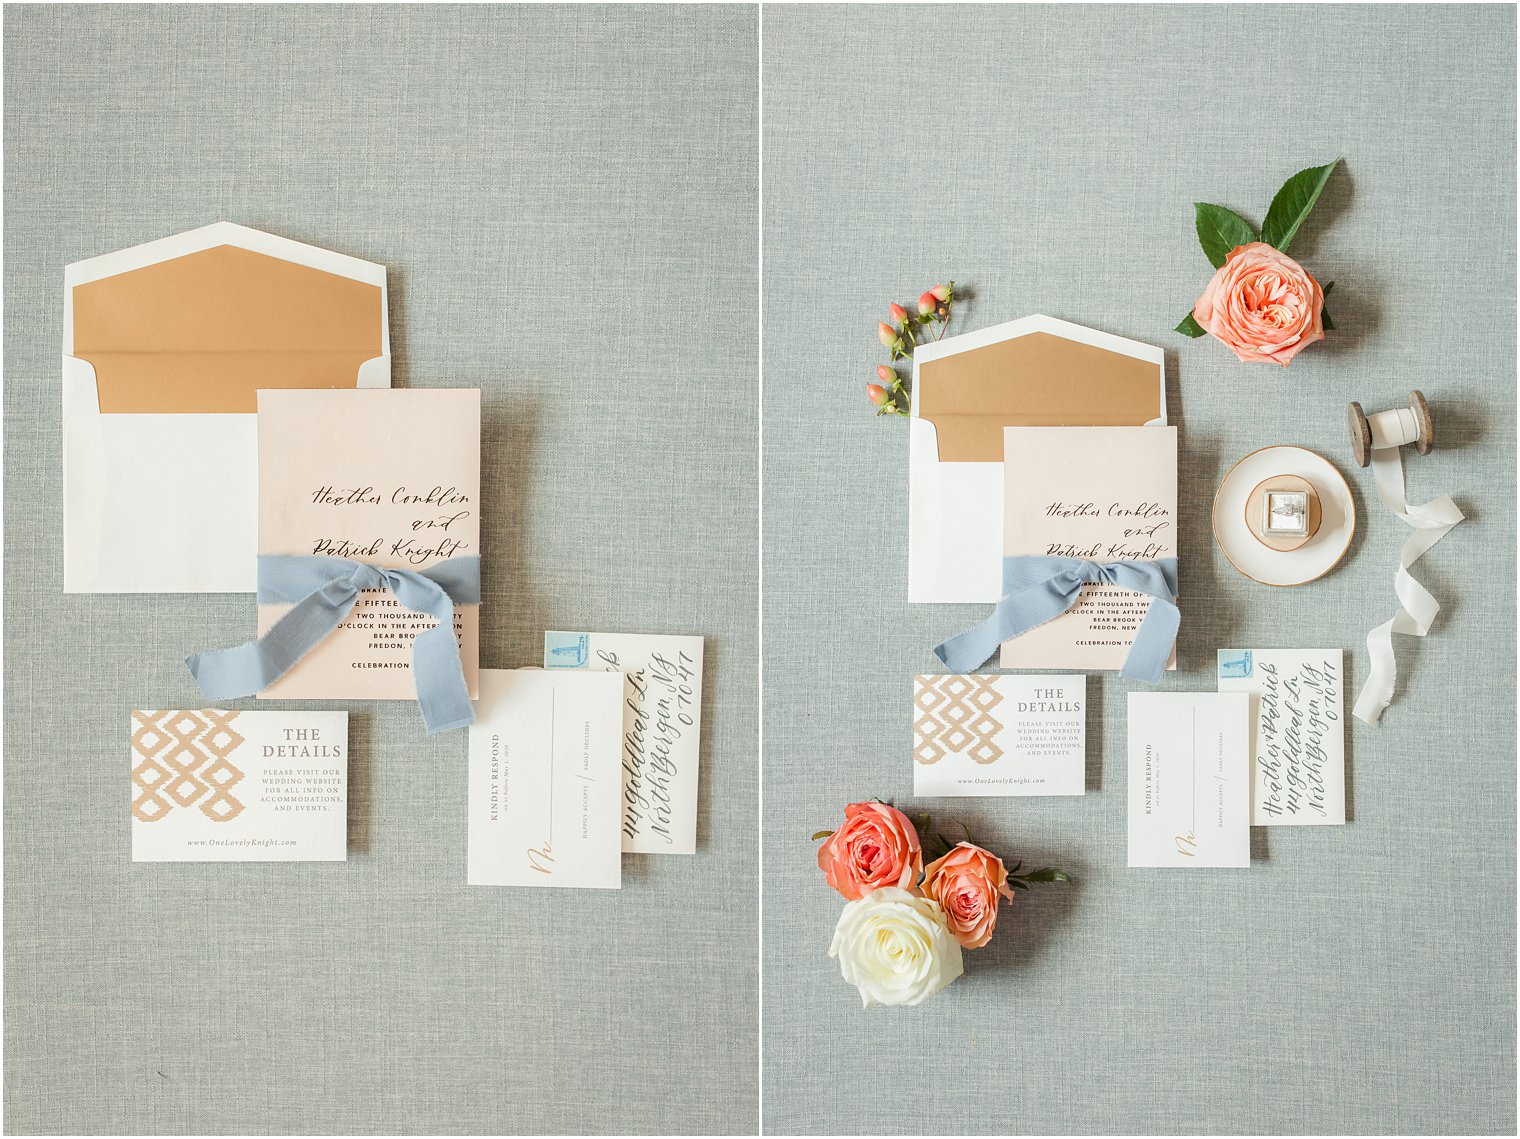 Wedding invitation by Lace and Belle